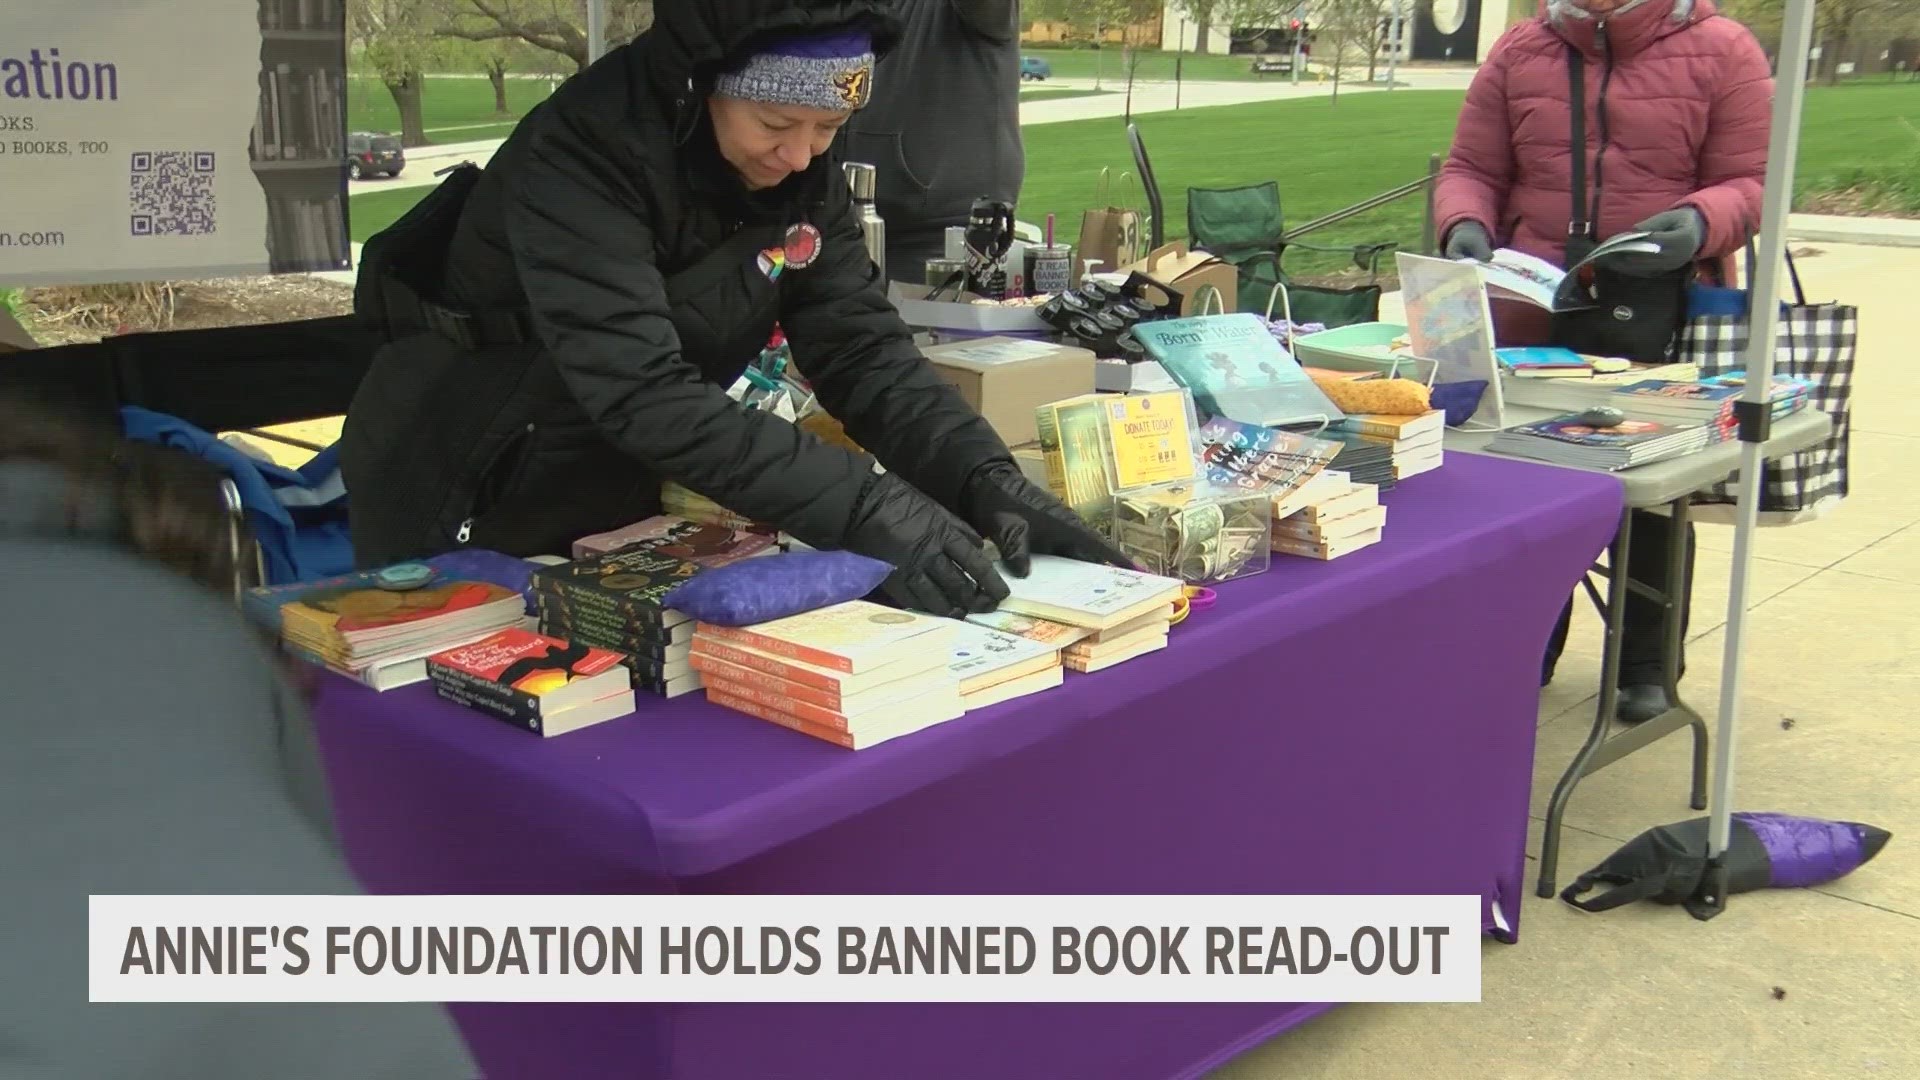 The event featured story time for kids and several guest speakers in order to give attendees access to banned books and information about the foundation's mission.